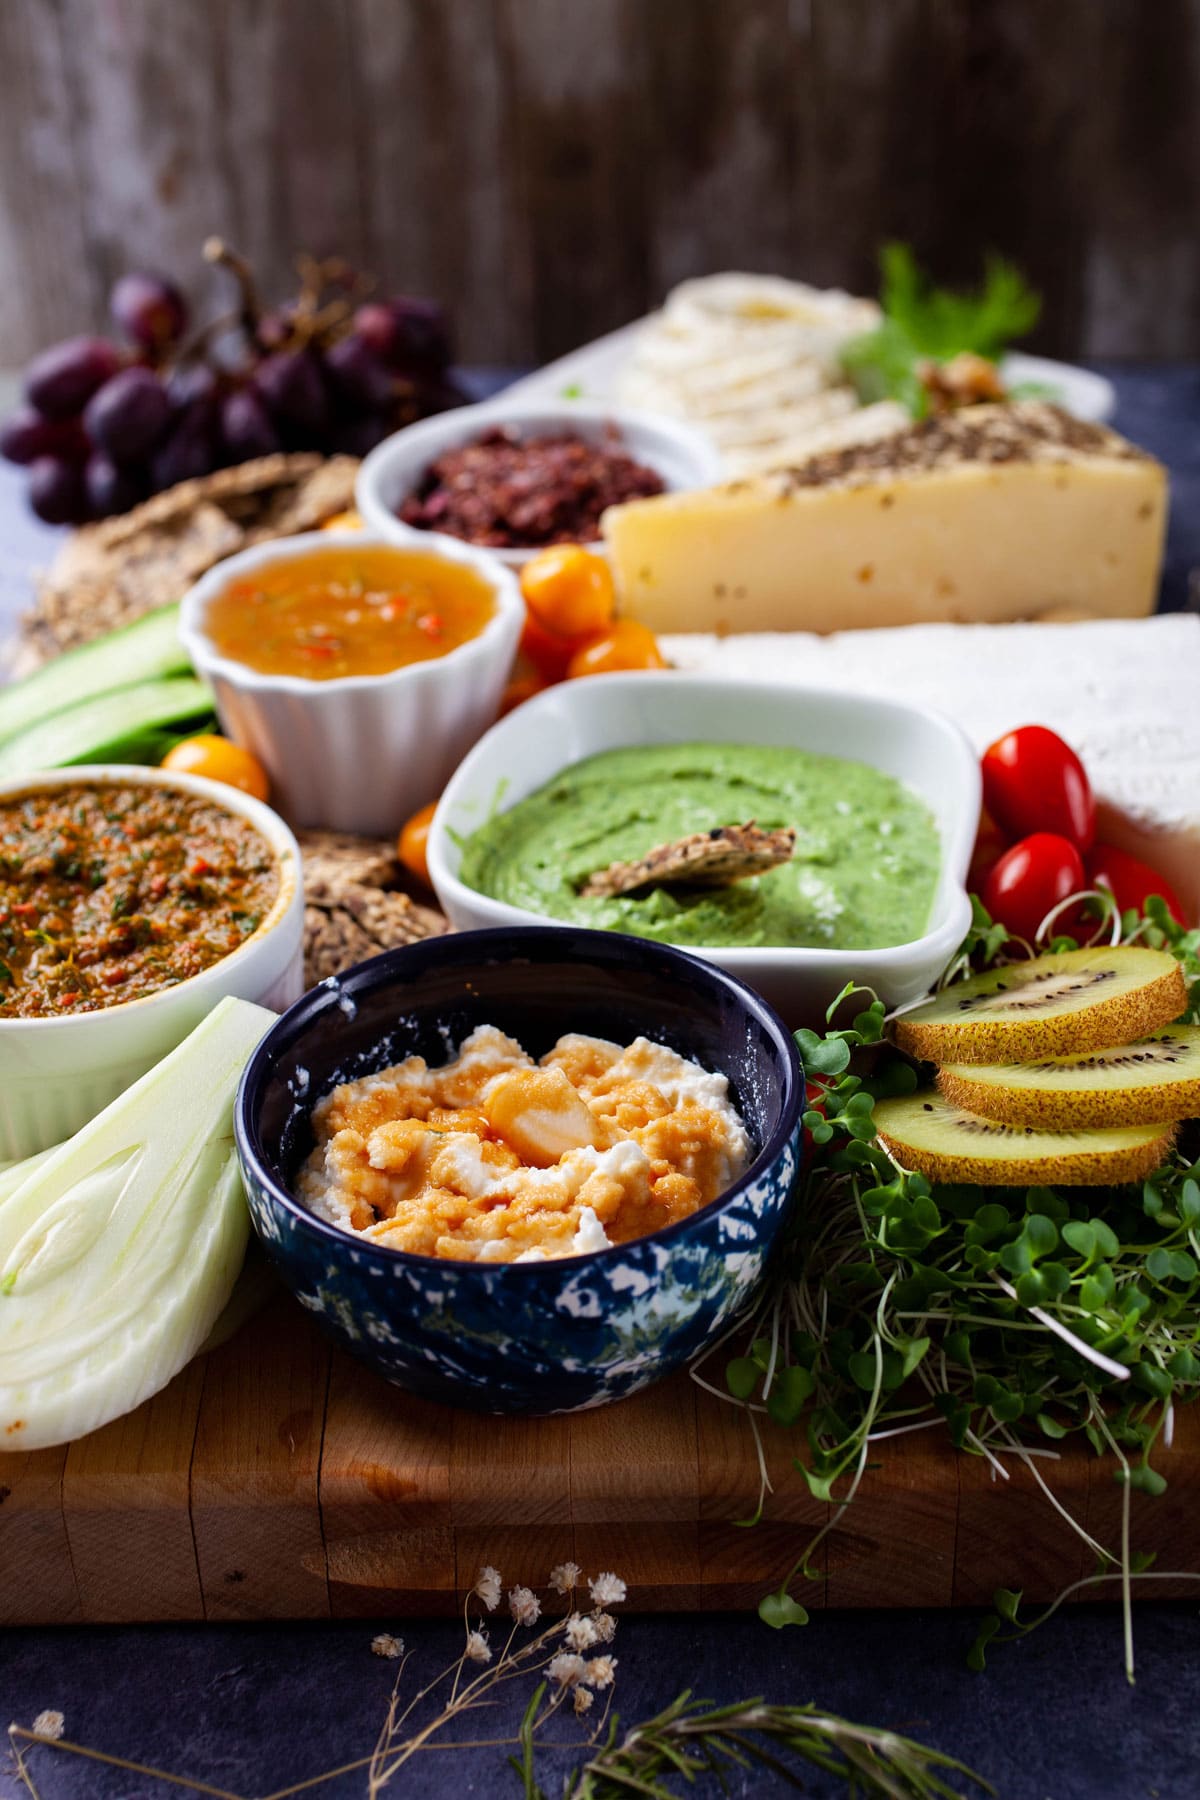 A wooden board topped with Italian dips, freshly cut veggies, fruits, cheeses, crackers, and spreads.